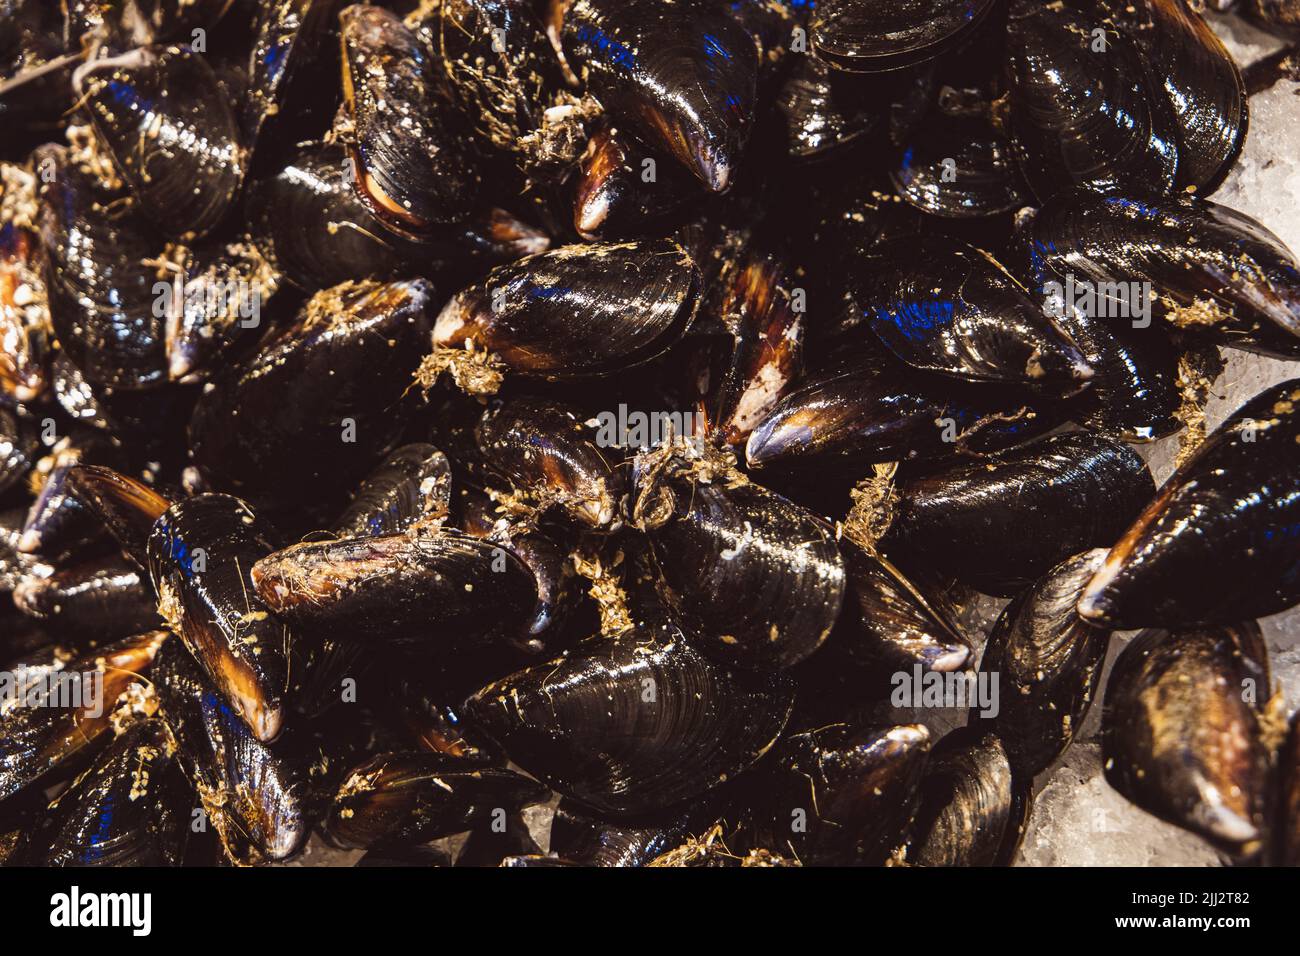 A pile of large black mussels sitting on ice at an outdoor farme'r market or fish market. Stock Photo